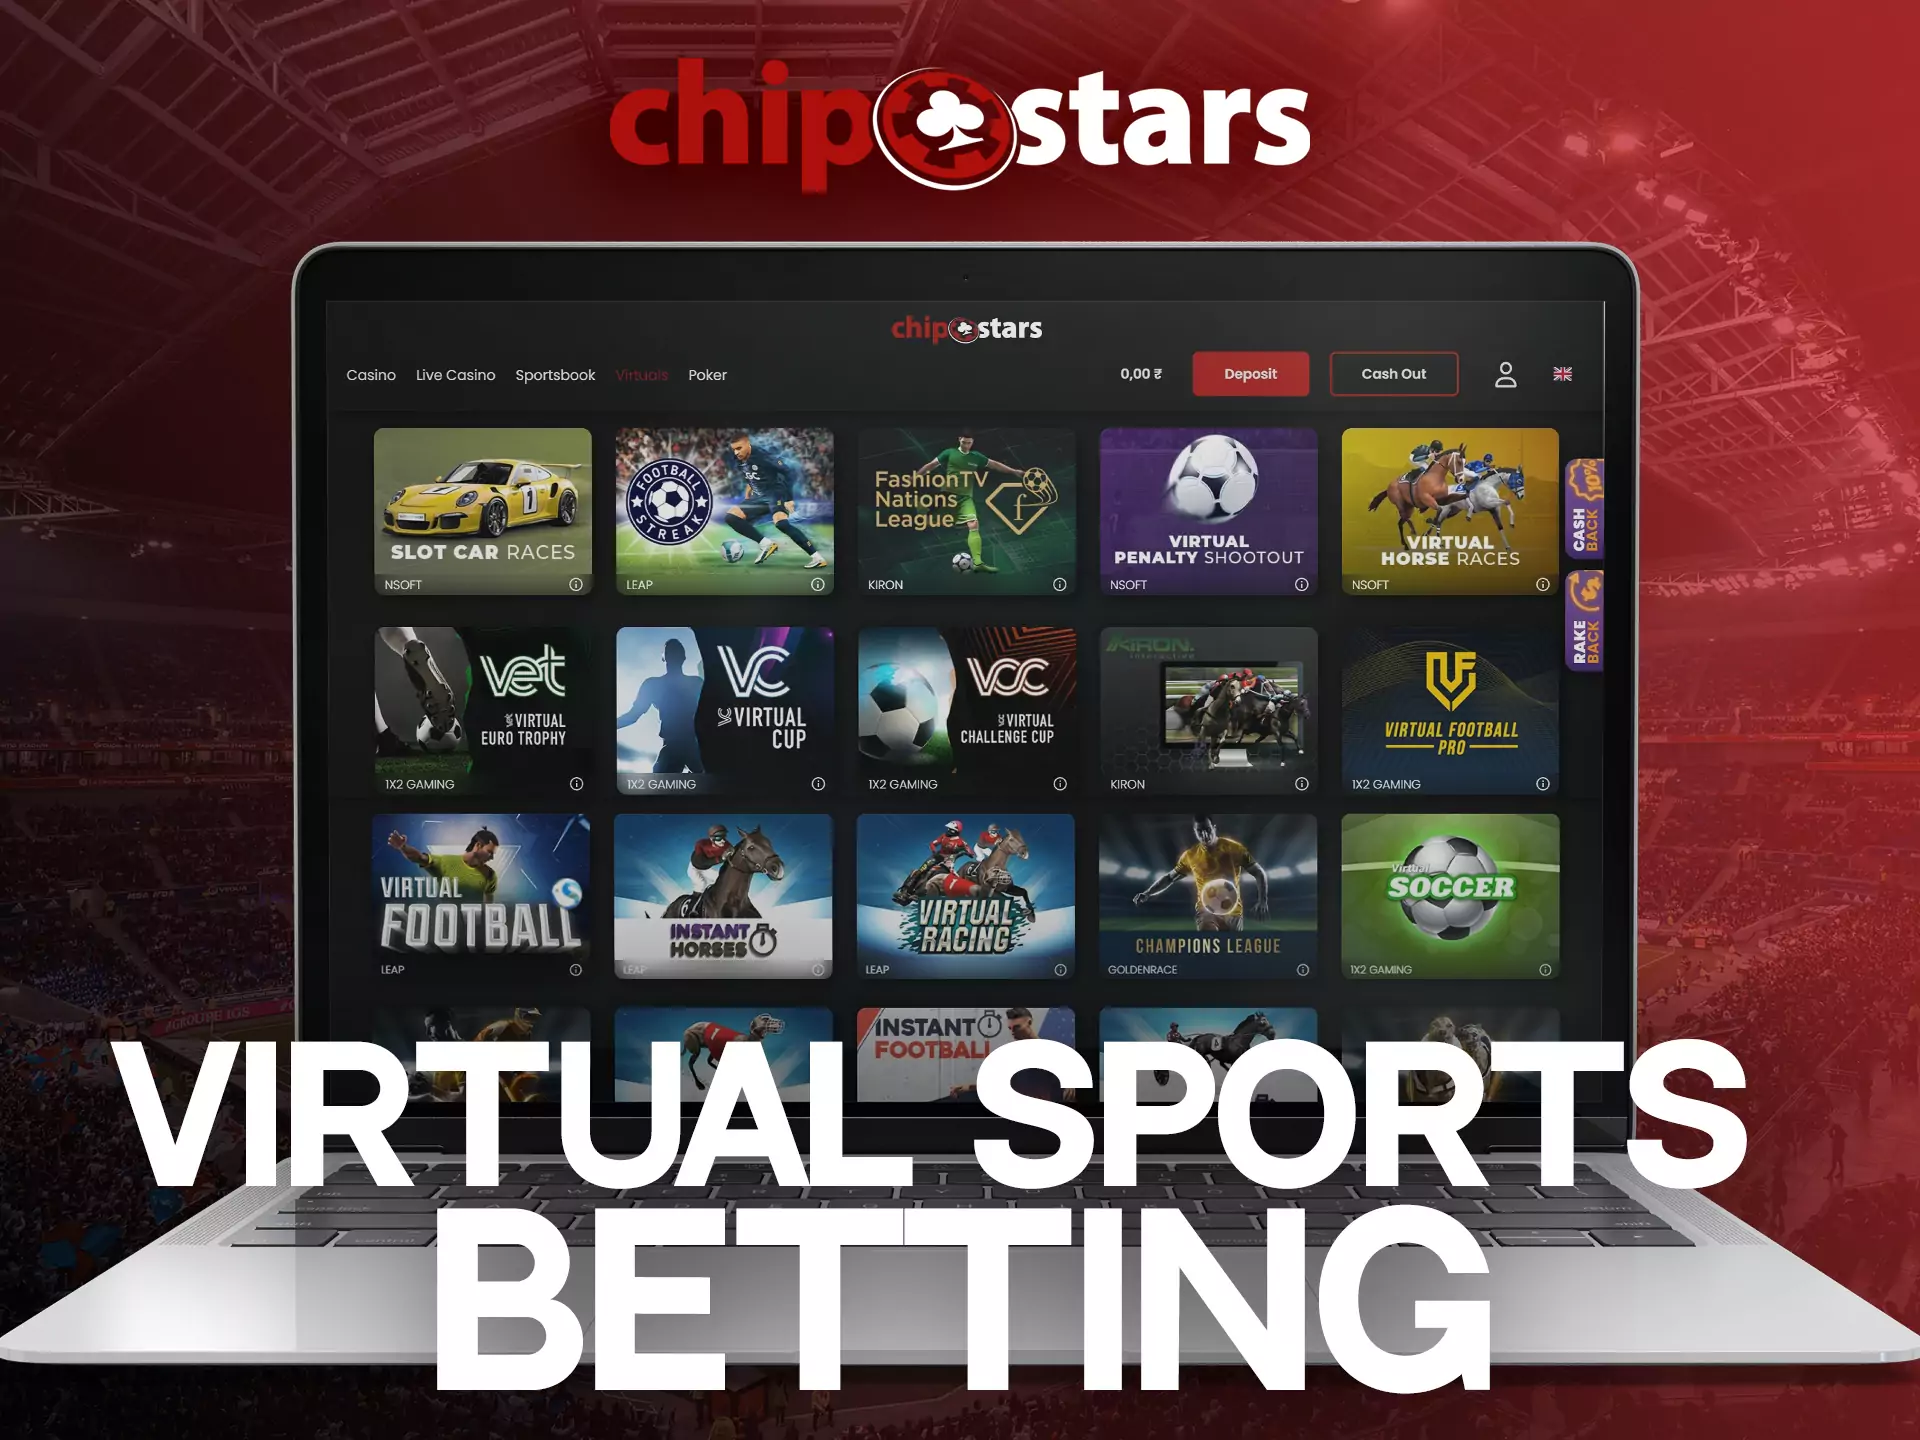 Besides sports matches, Indian users like betting on virtual sports championships.